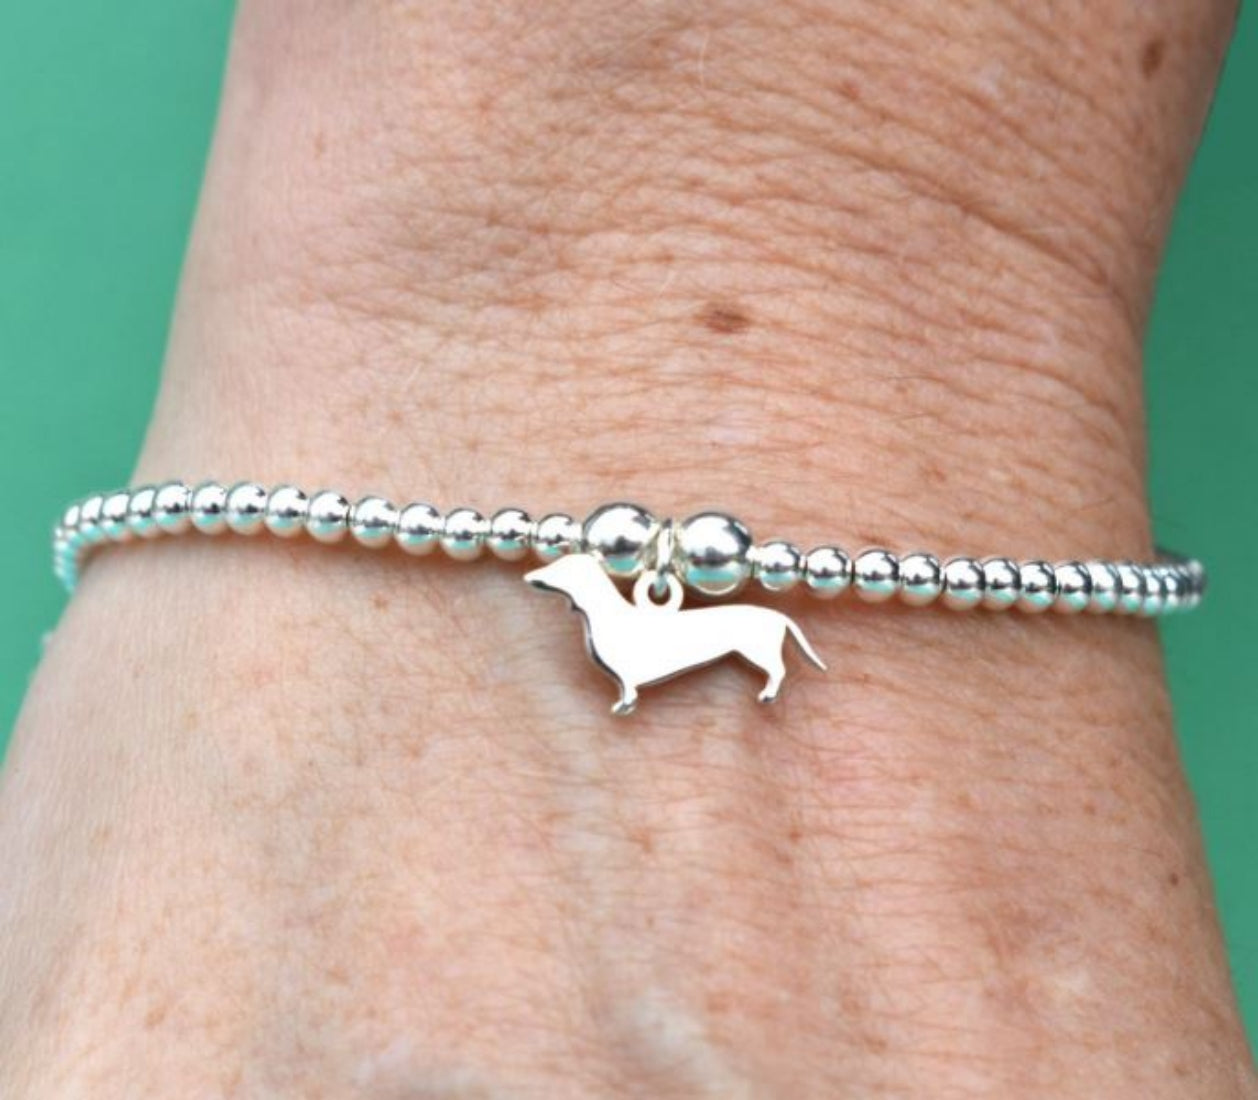 Dachshund Silhouette Silver Ball Bead Bracelet - Personalised